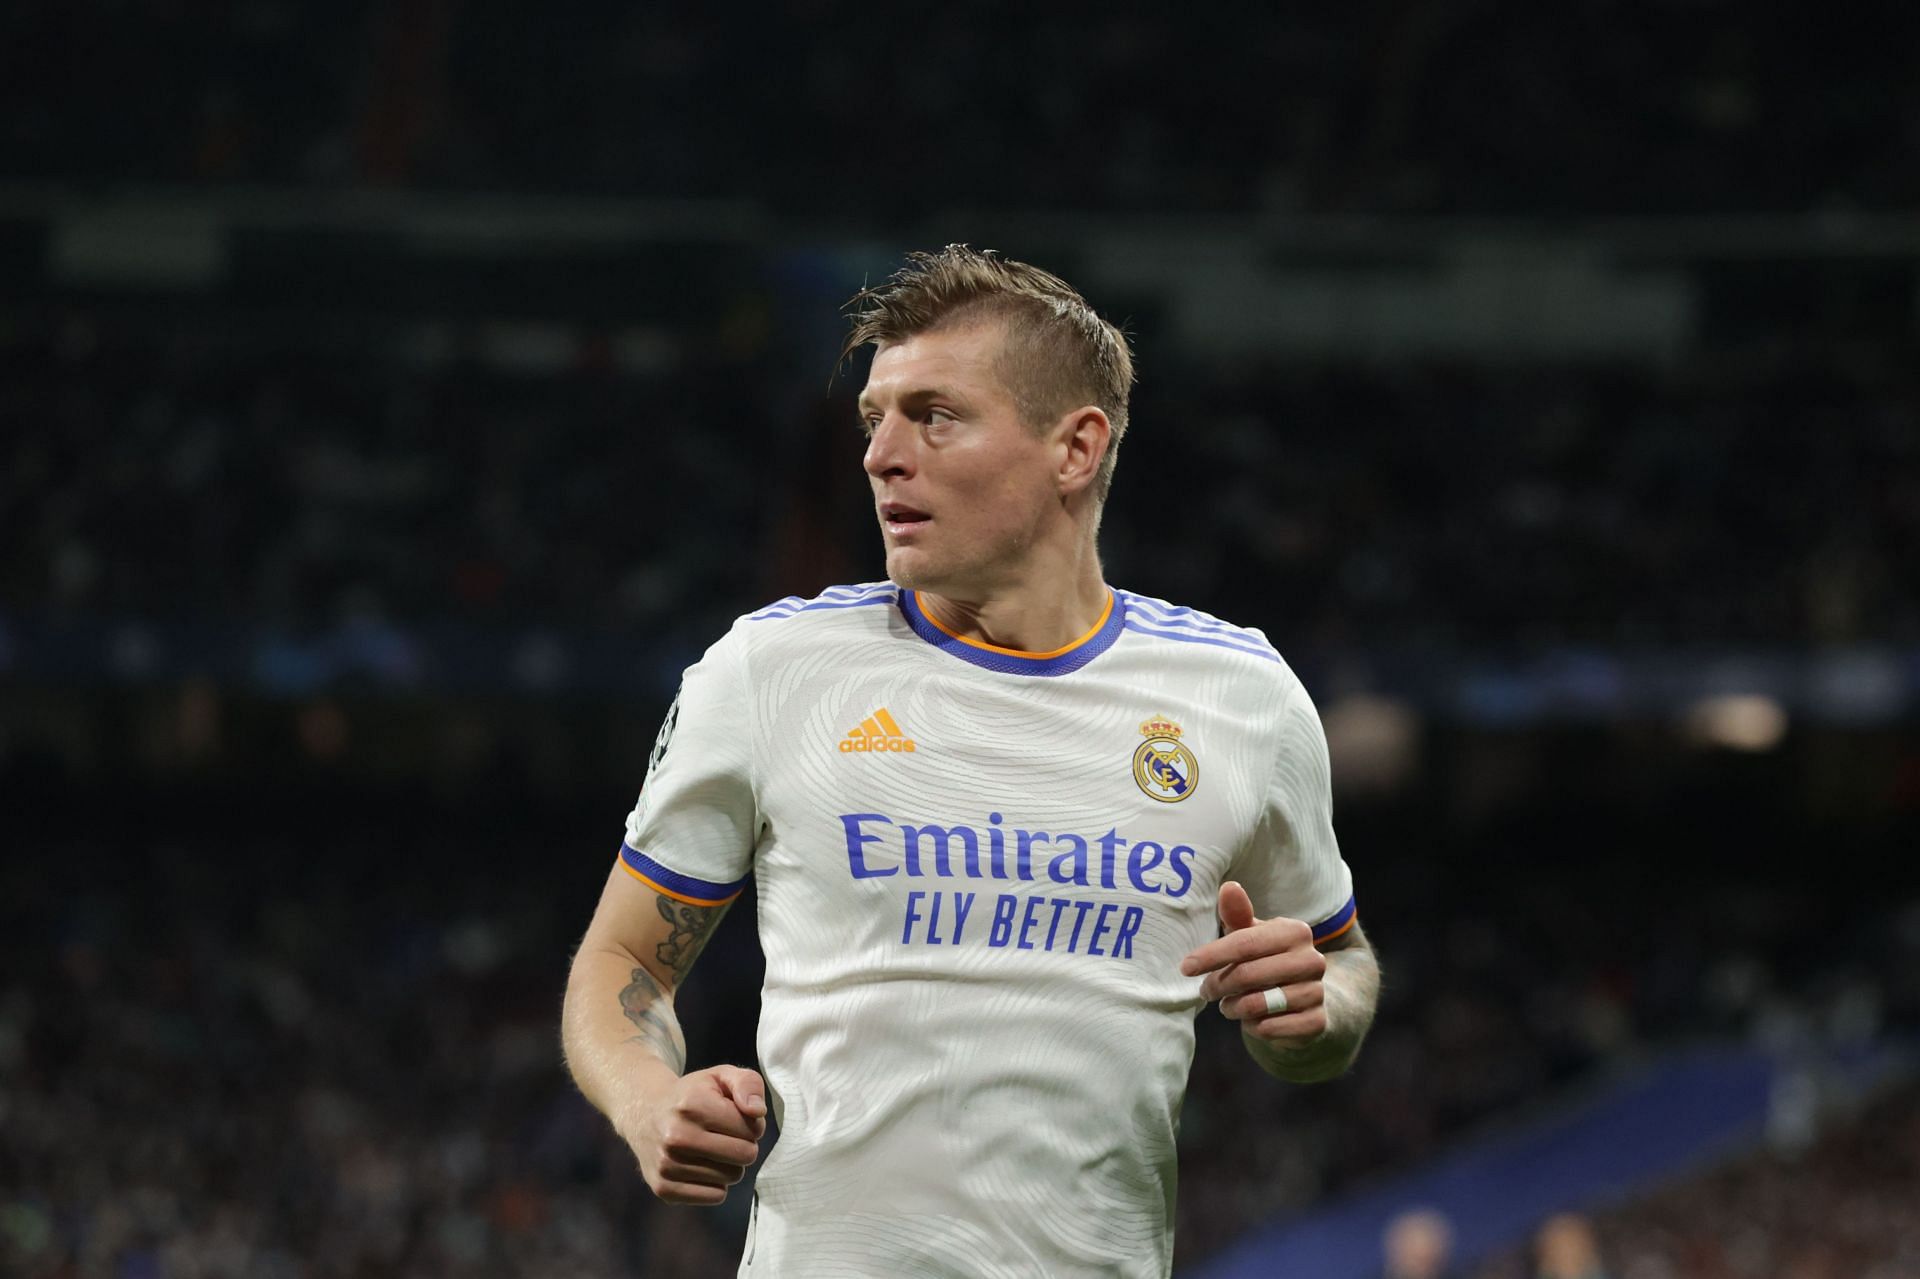 German maestro Toni Kroos in action for Real Madrid